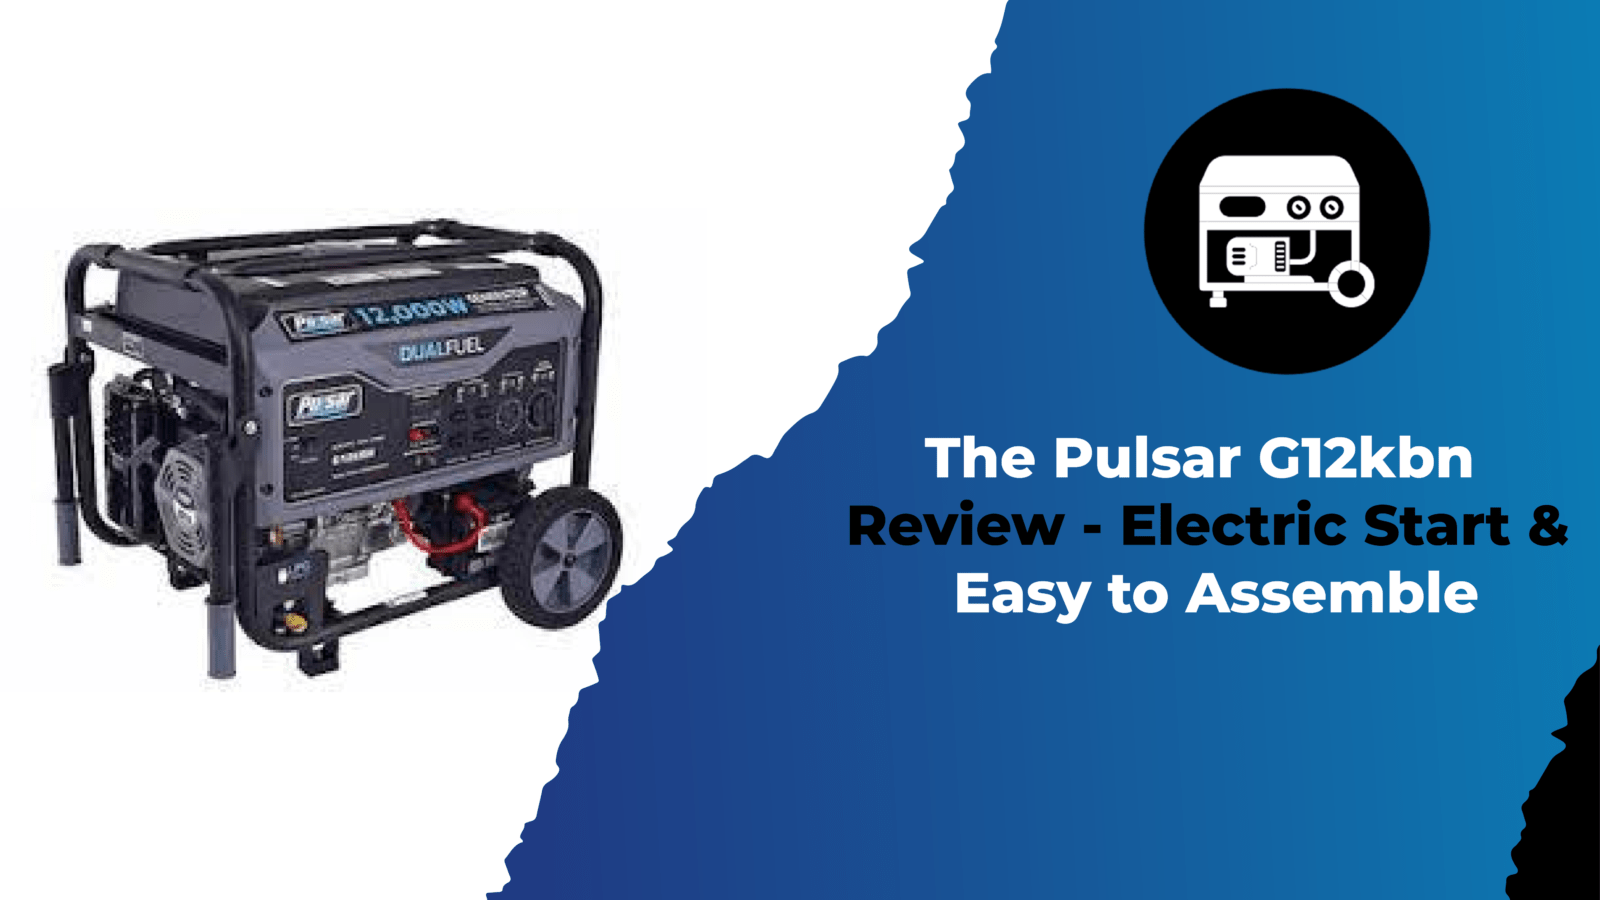 The Pulsar G12kbn Review - Electric Start & Easy to Assemble